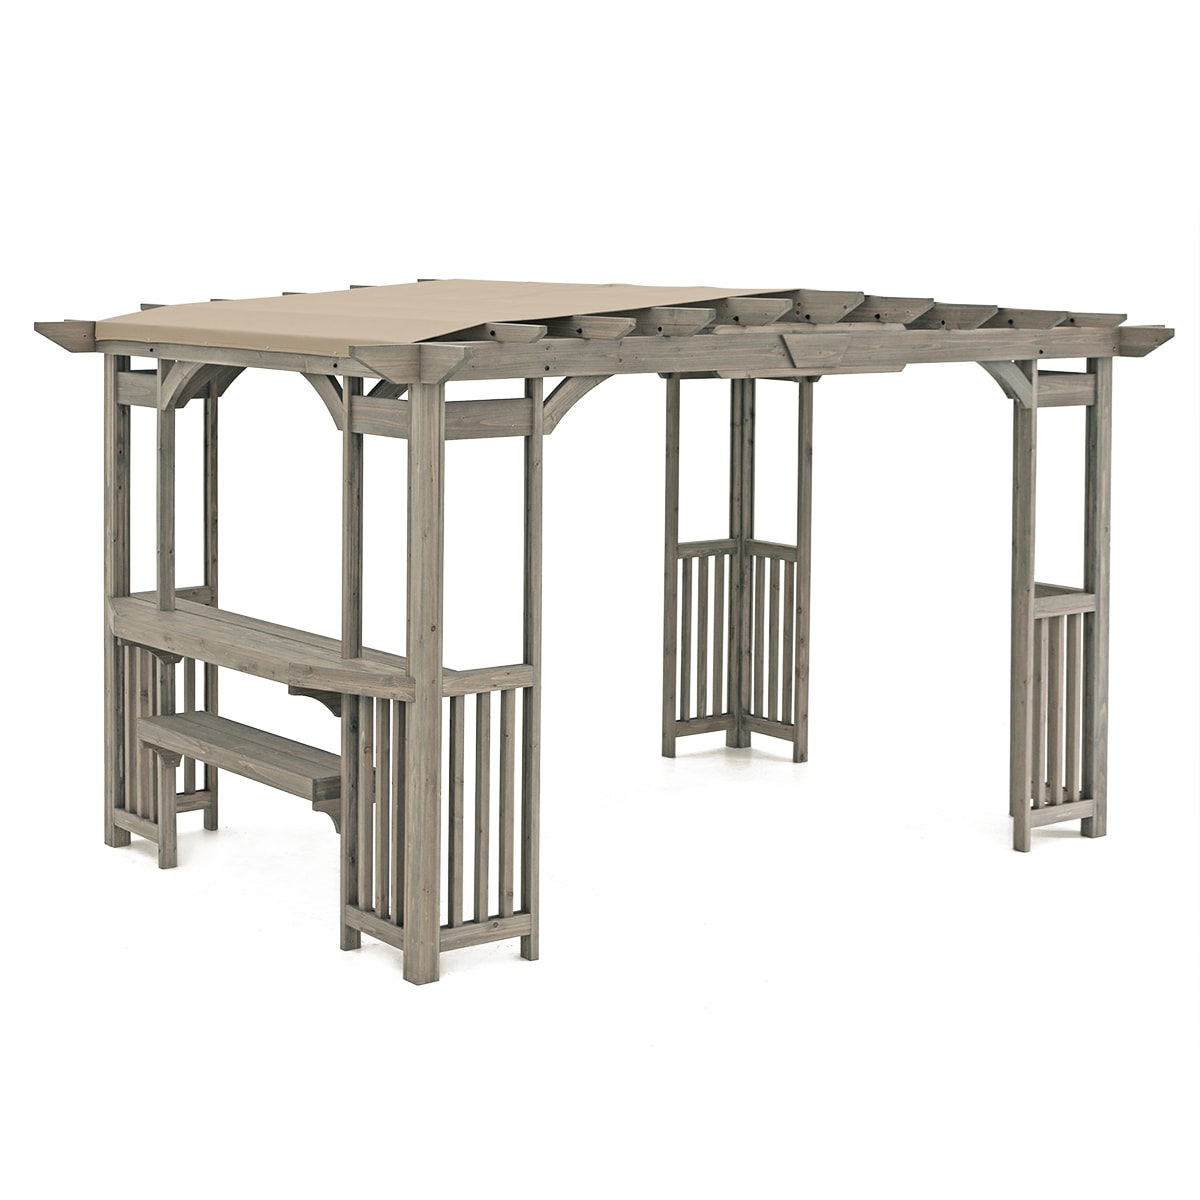 Yardistry 10-ft W x 14-ft L x 8-ft 2-in Gray Wood Attached Pergola with Canopy on Sale At Lowe's